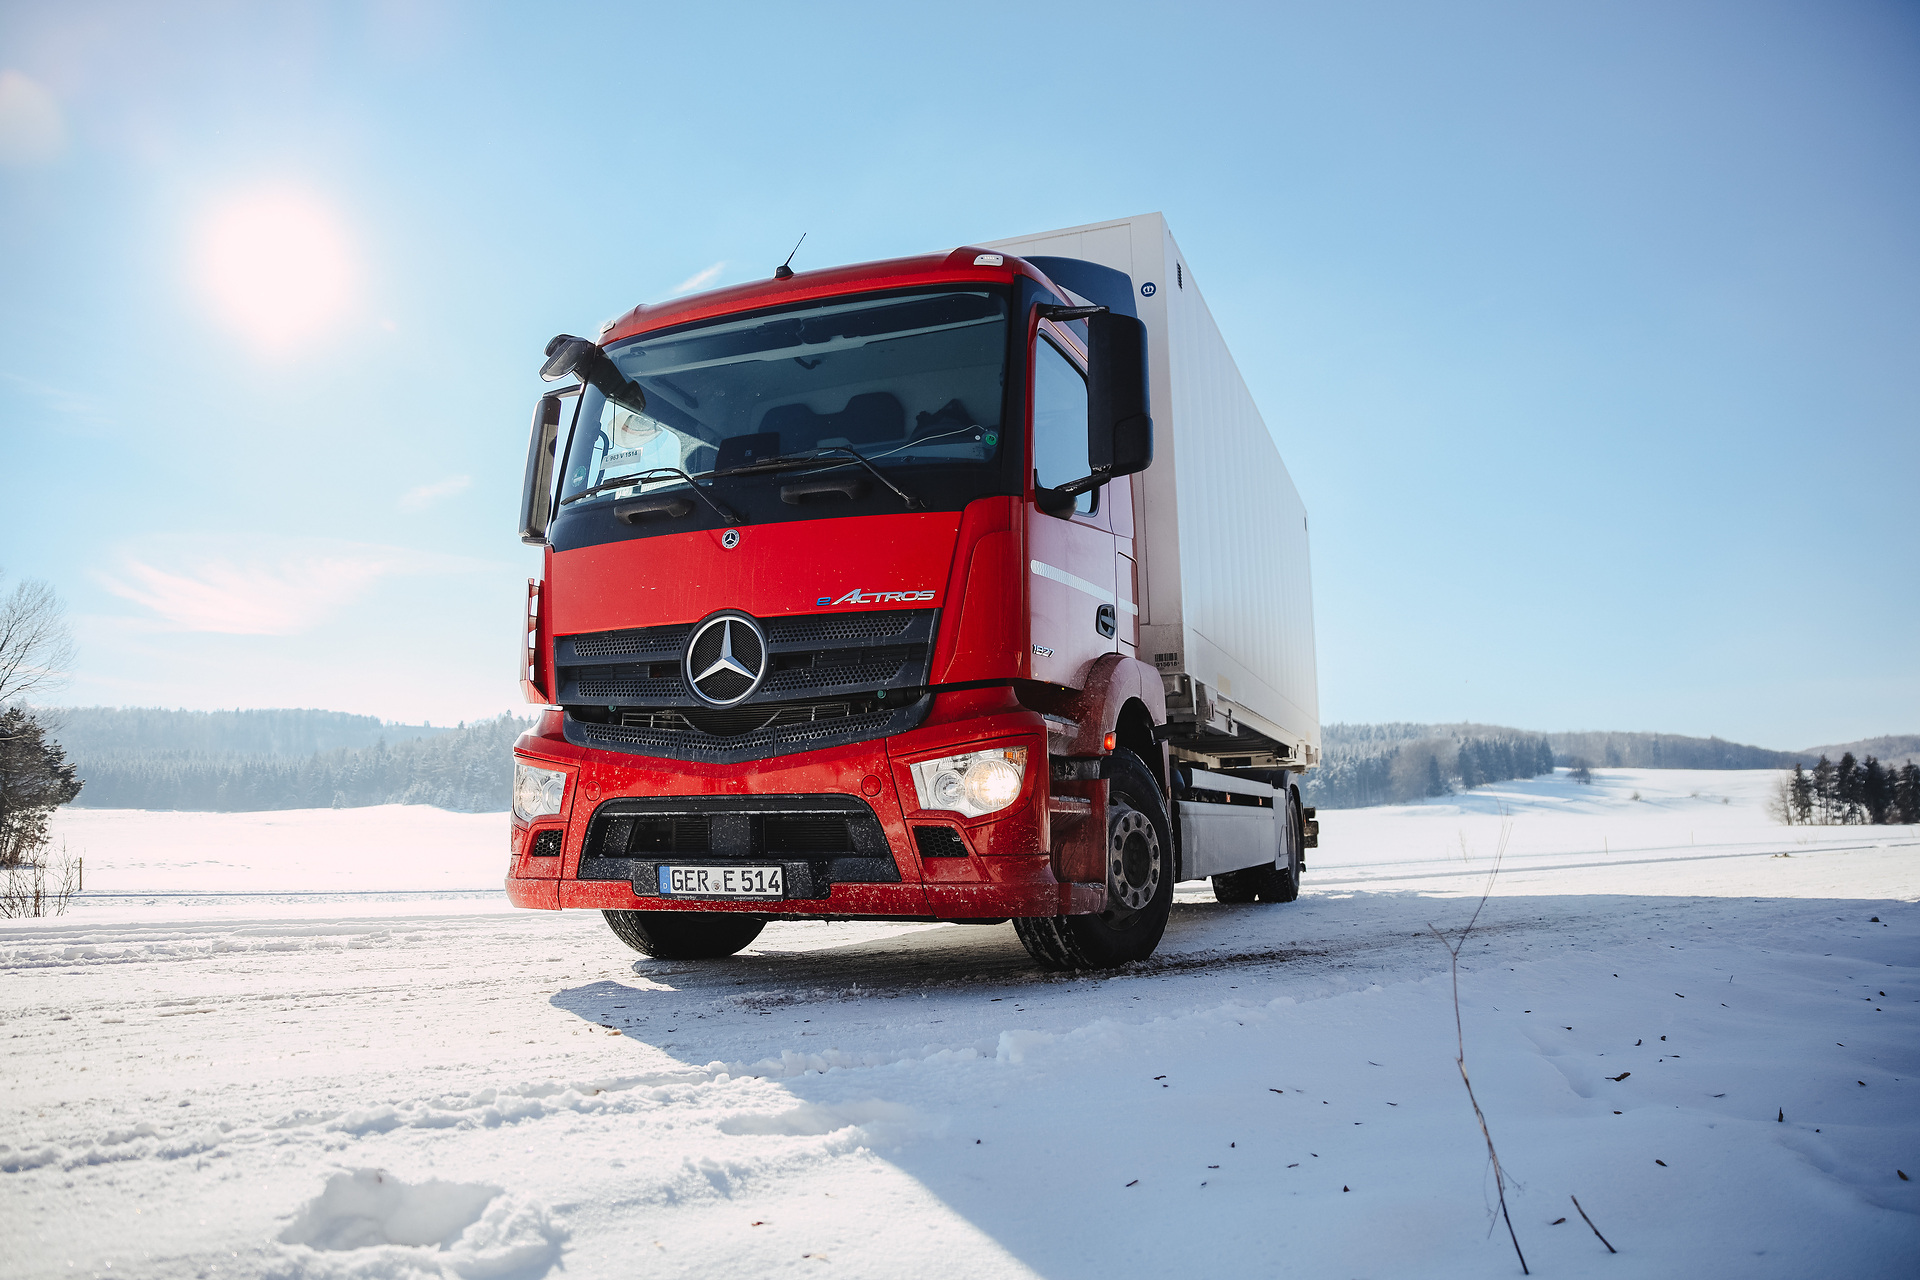 Winter testing of Mercedes-Benz trucks: eActros and eEconic face Jack Frost